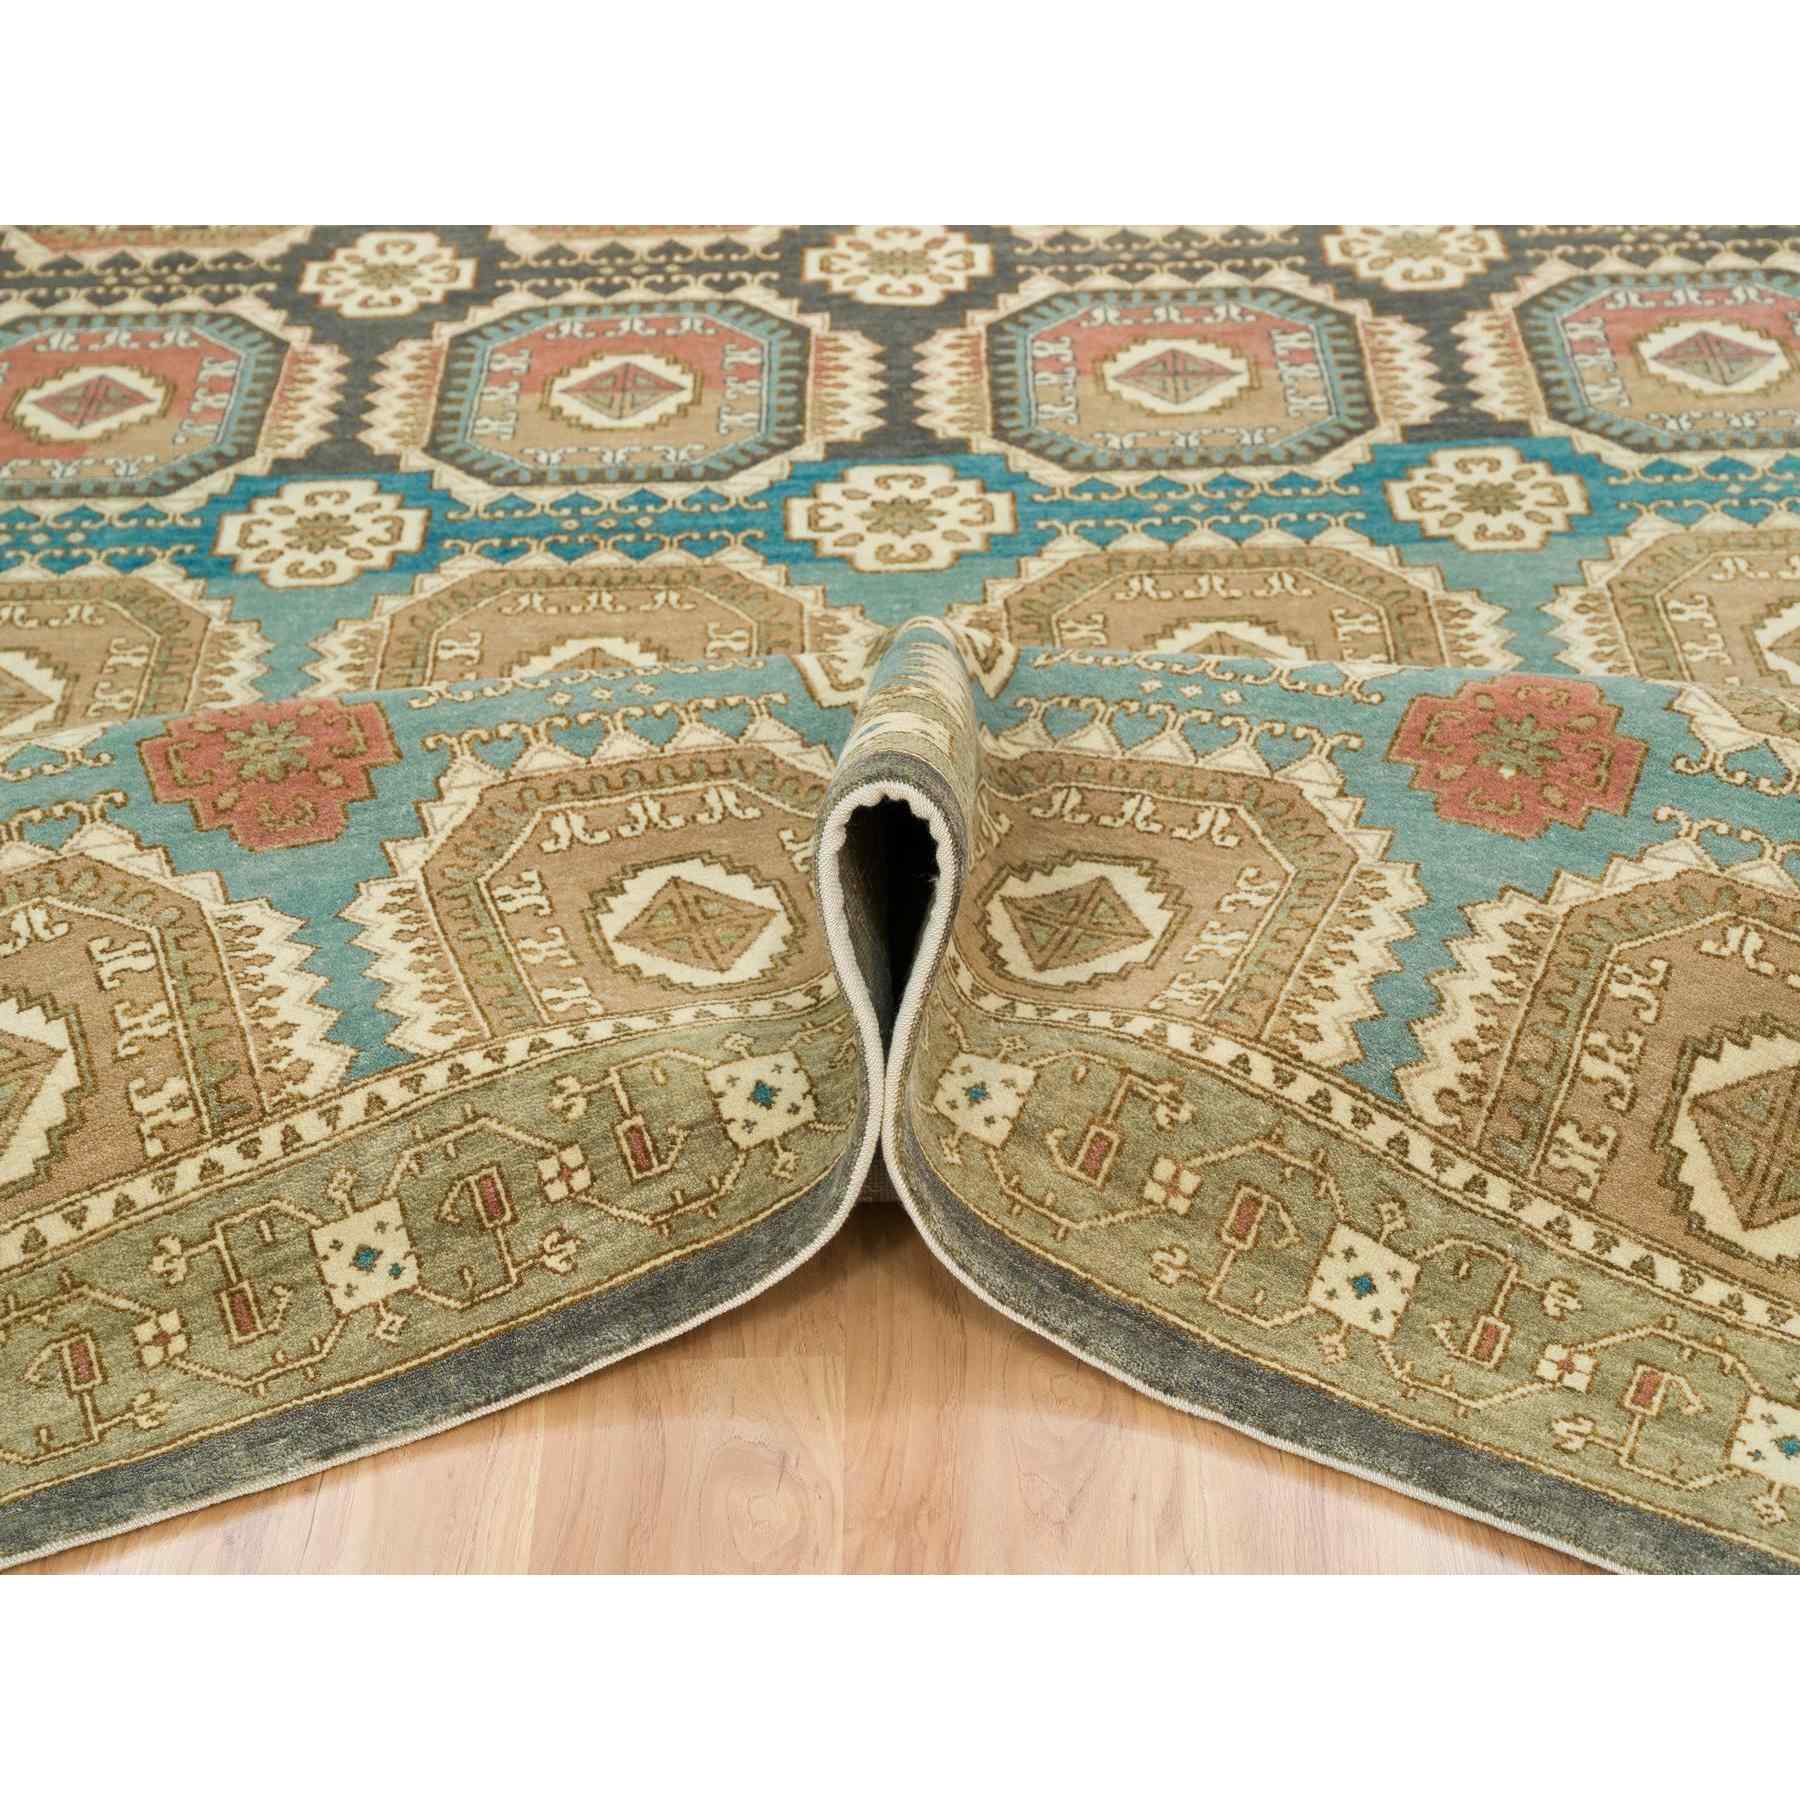 Transitional-Hand-Knotted-Rug-327690